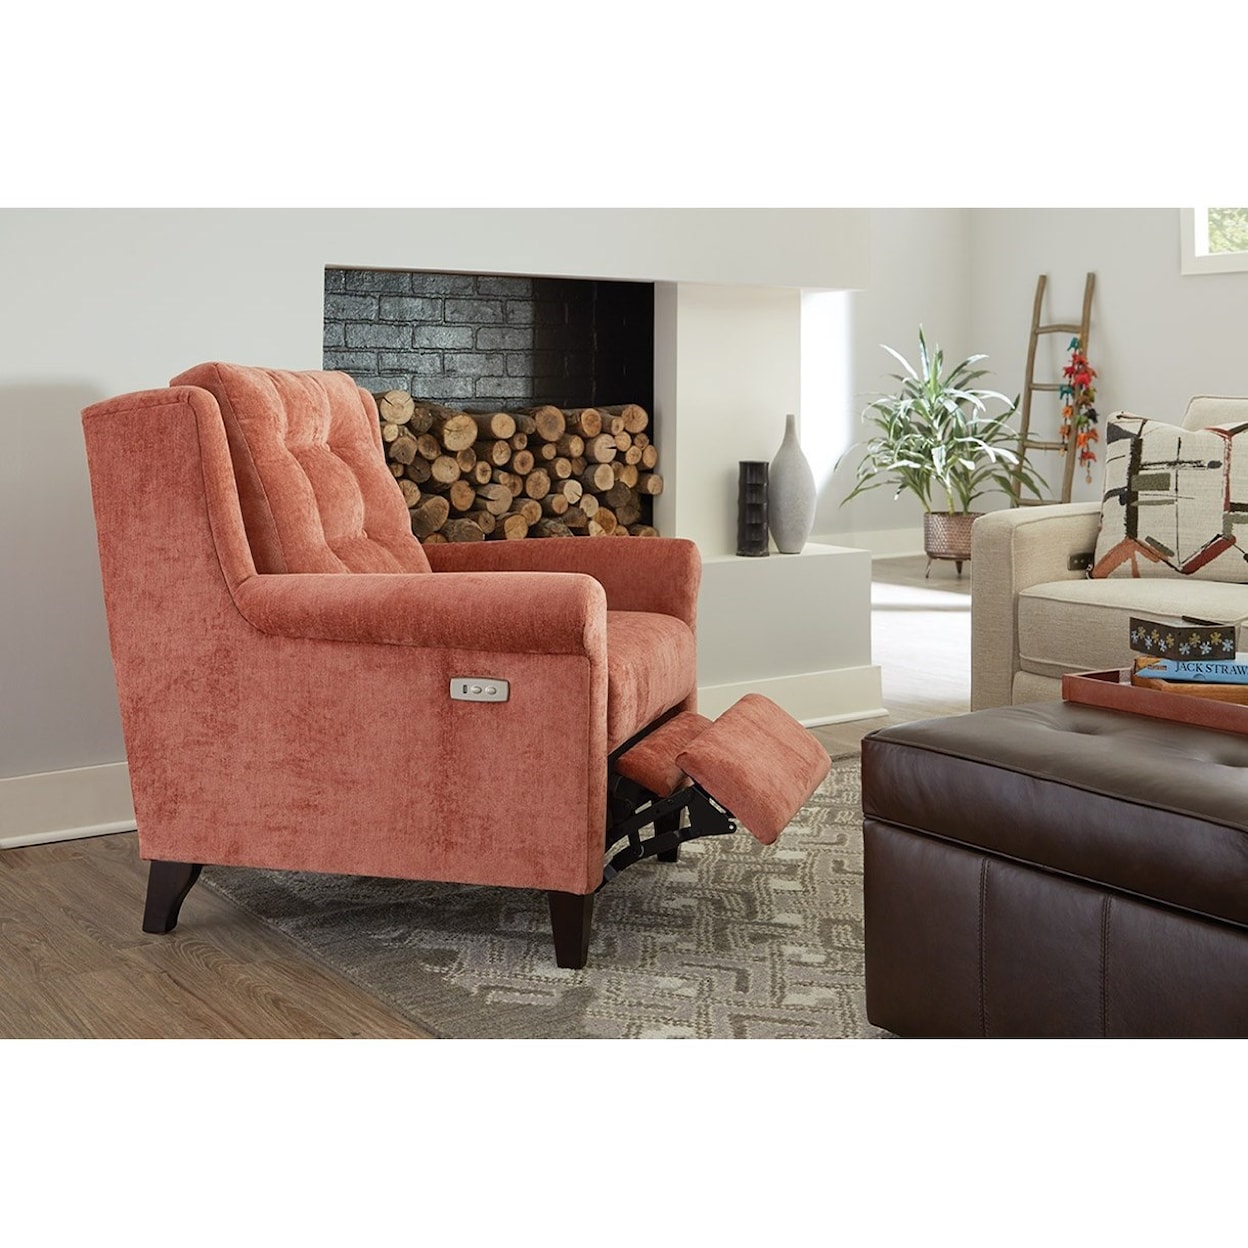 England Finley Chair with Power Ottoman